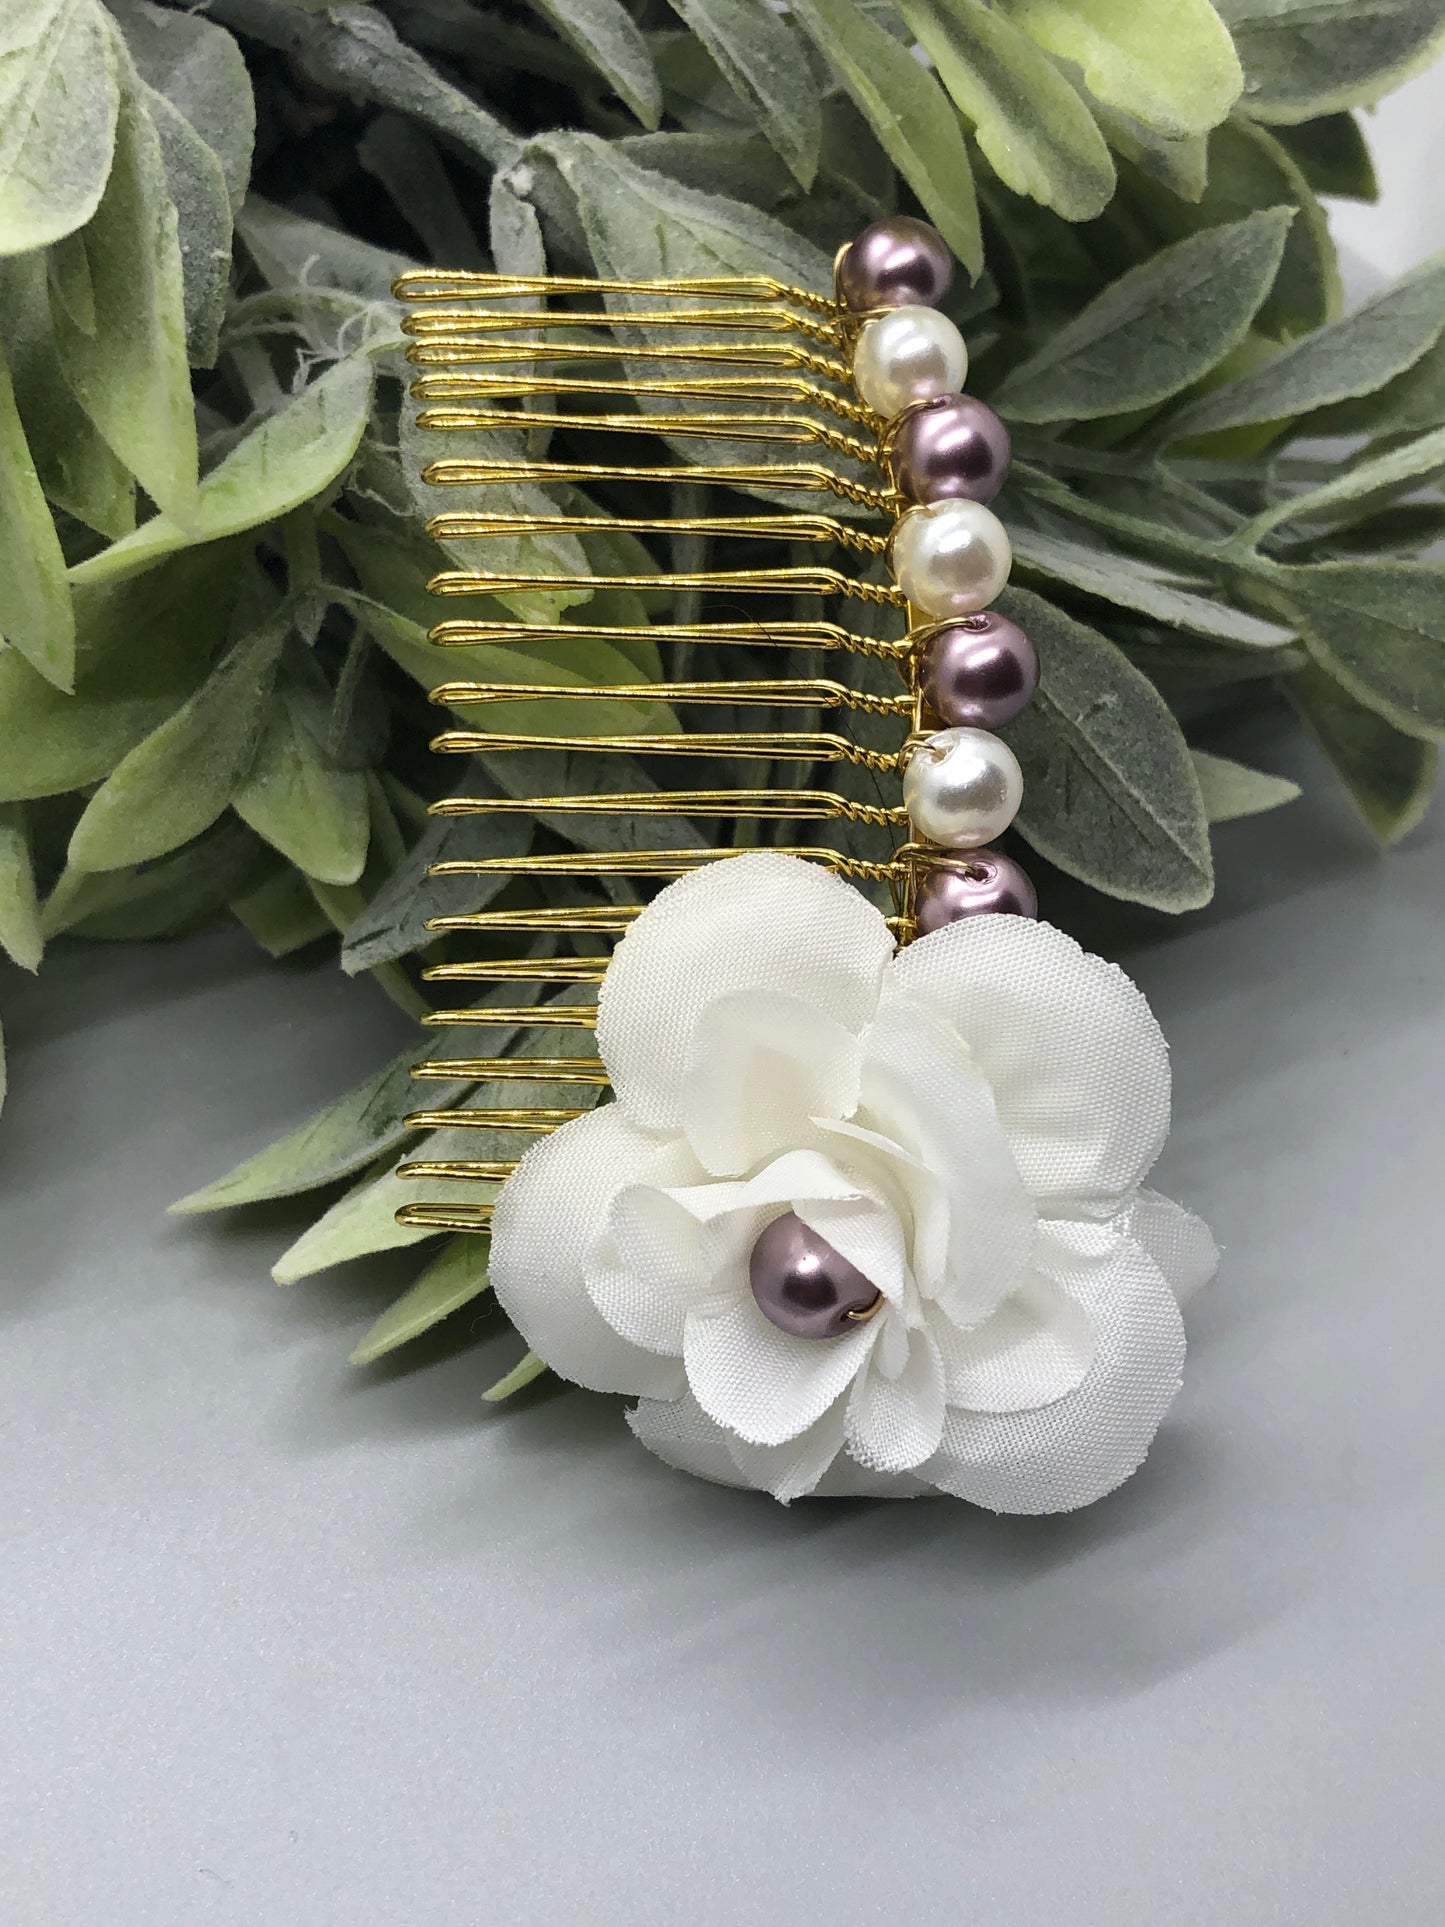 White Flower Gray White  Beads 2.0' Metal Side Comb Retro Vintage Style 1 pc